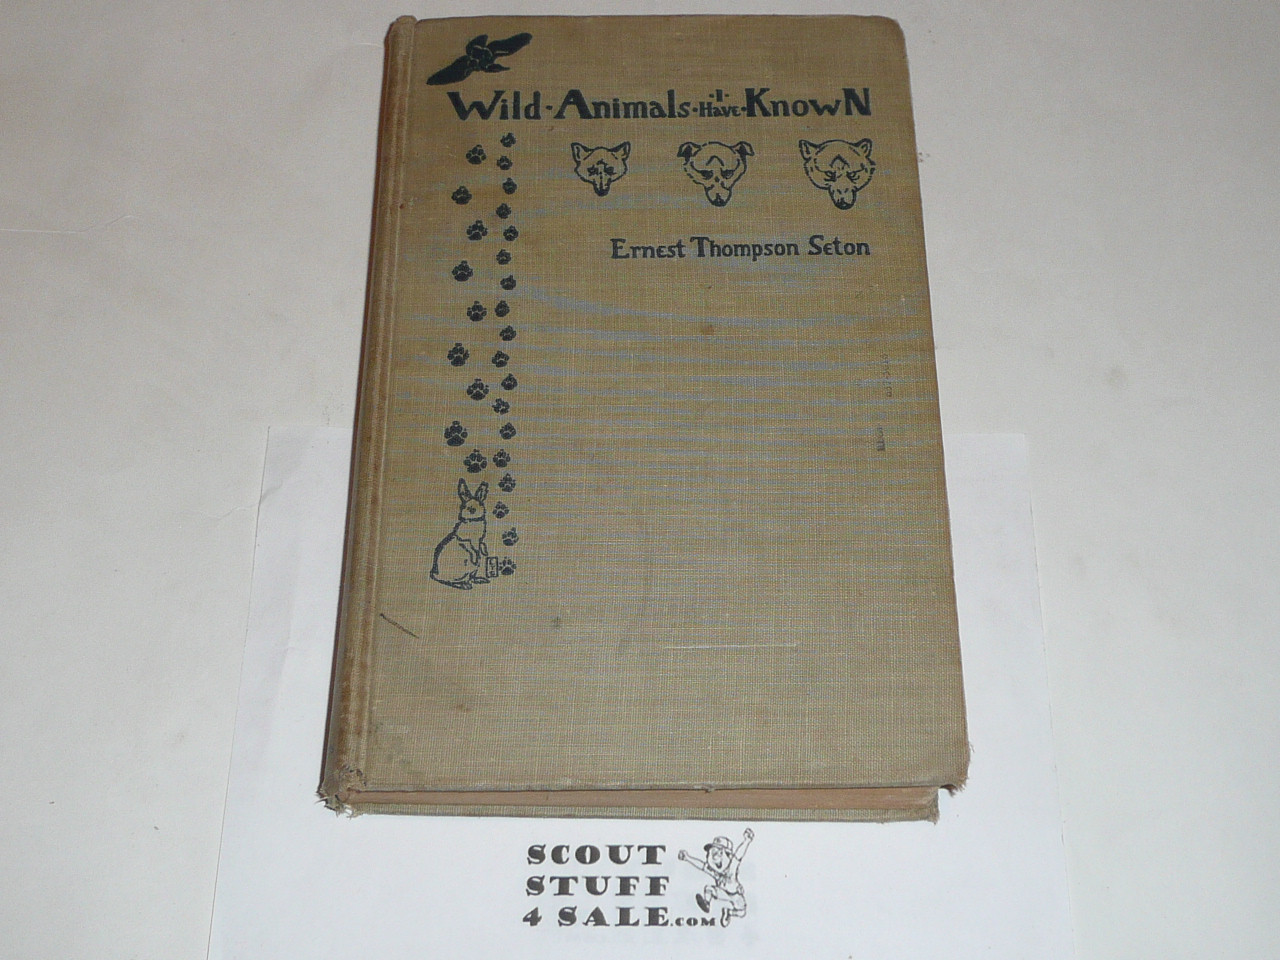 1926 Wild Animals I have know, By Ernest Thompson Seton, Inscribed and signed by Author, worn